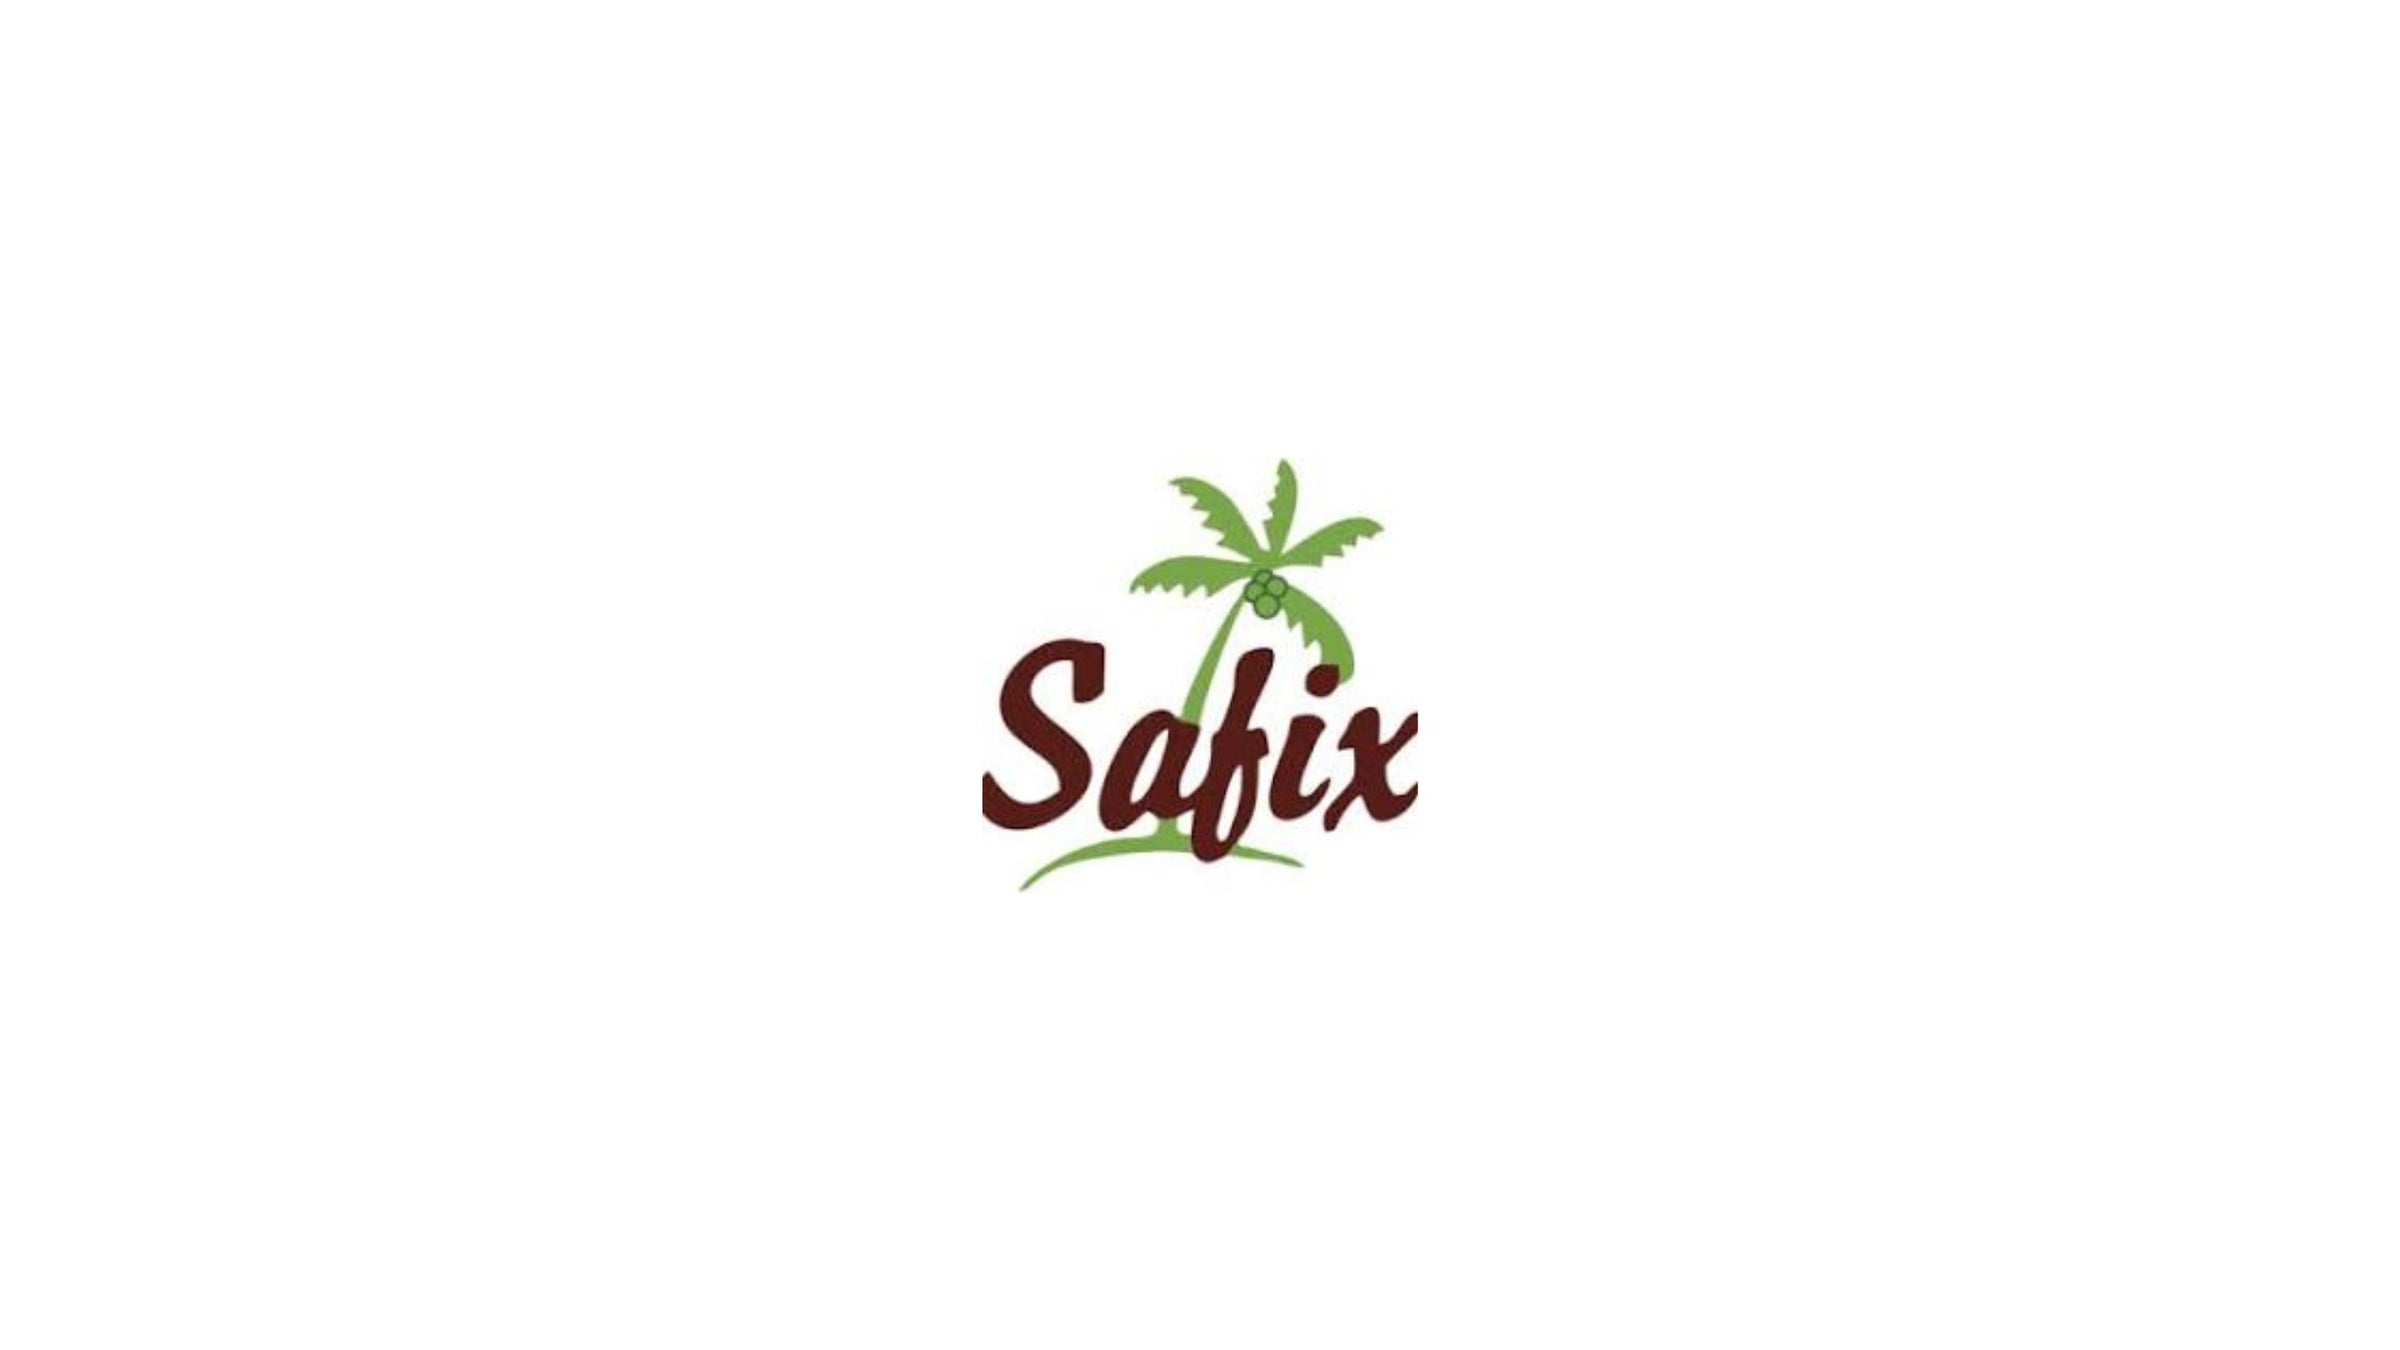 Safix is brown looping text on a white background 